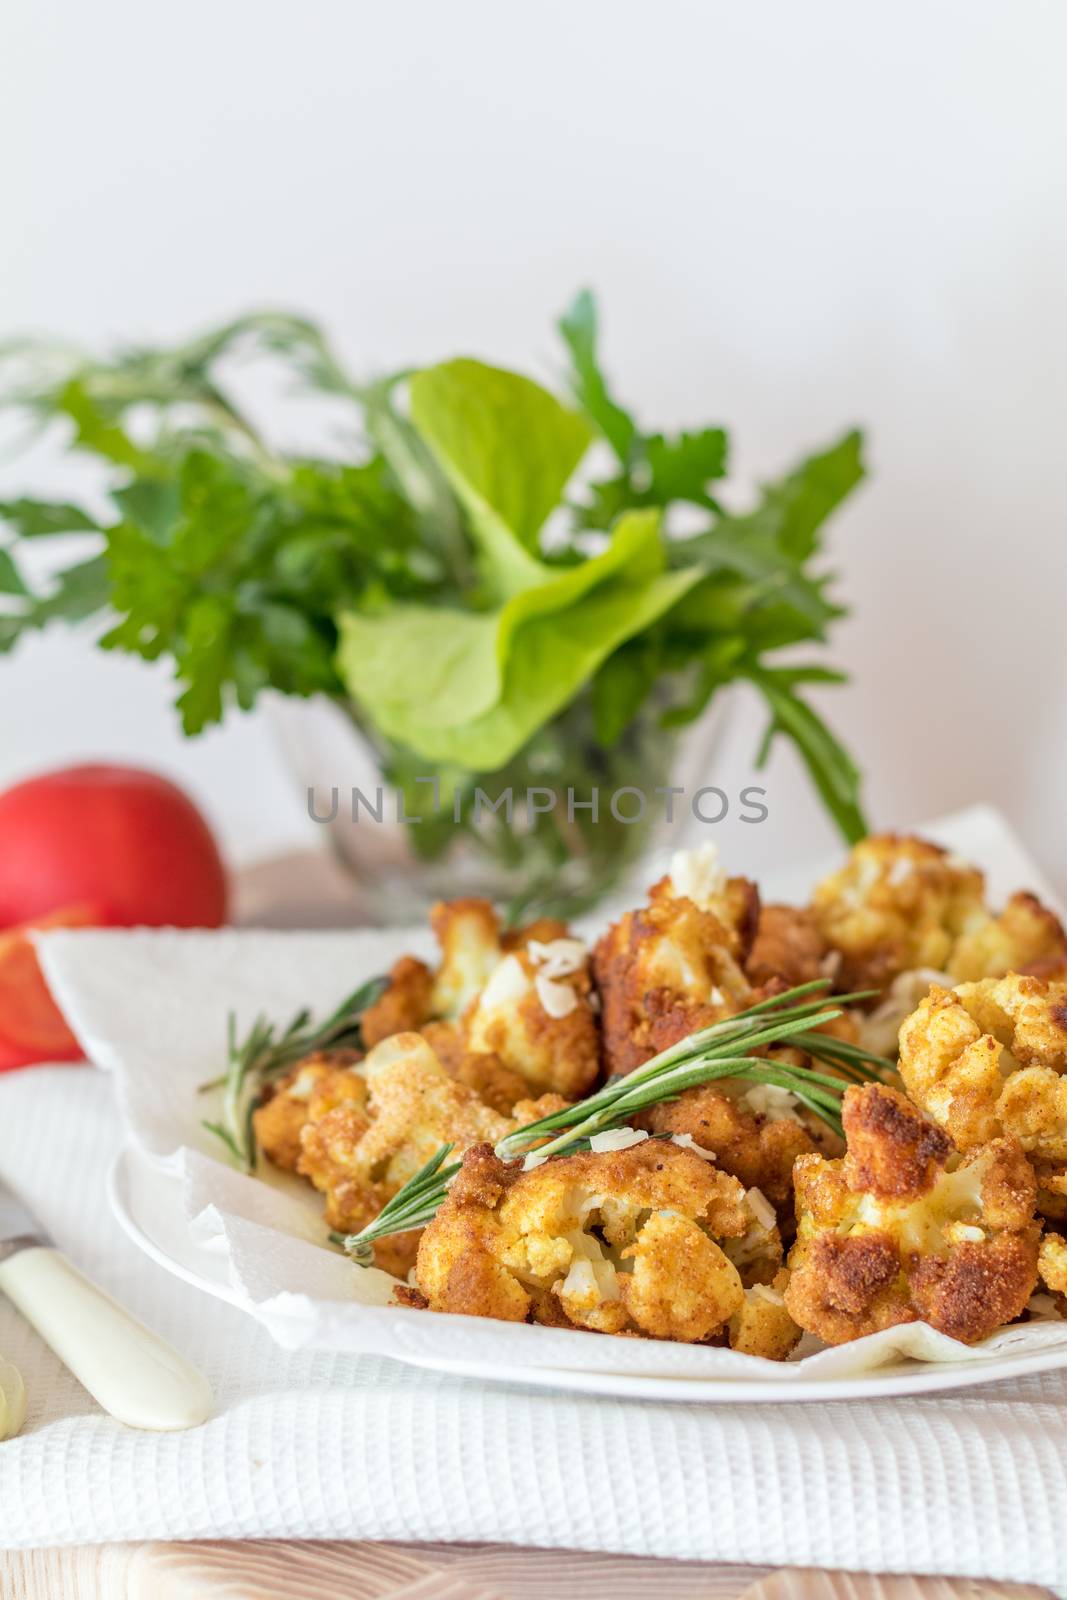 Fried cauliflower in batter on a white plate with white napkin.  by ArtSvitlyna